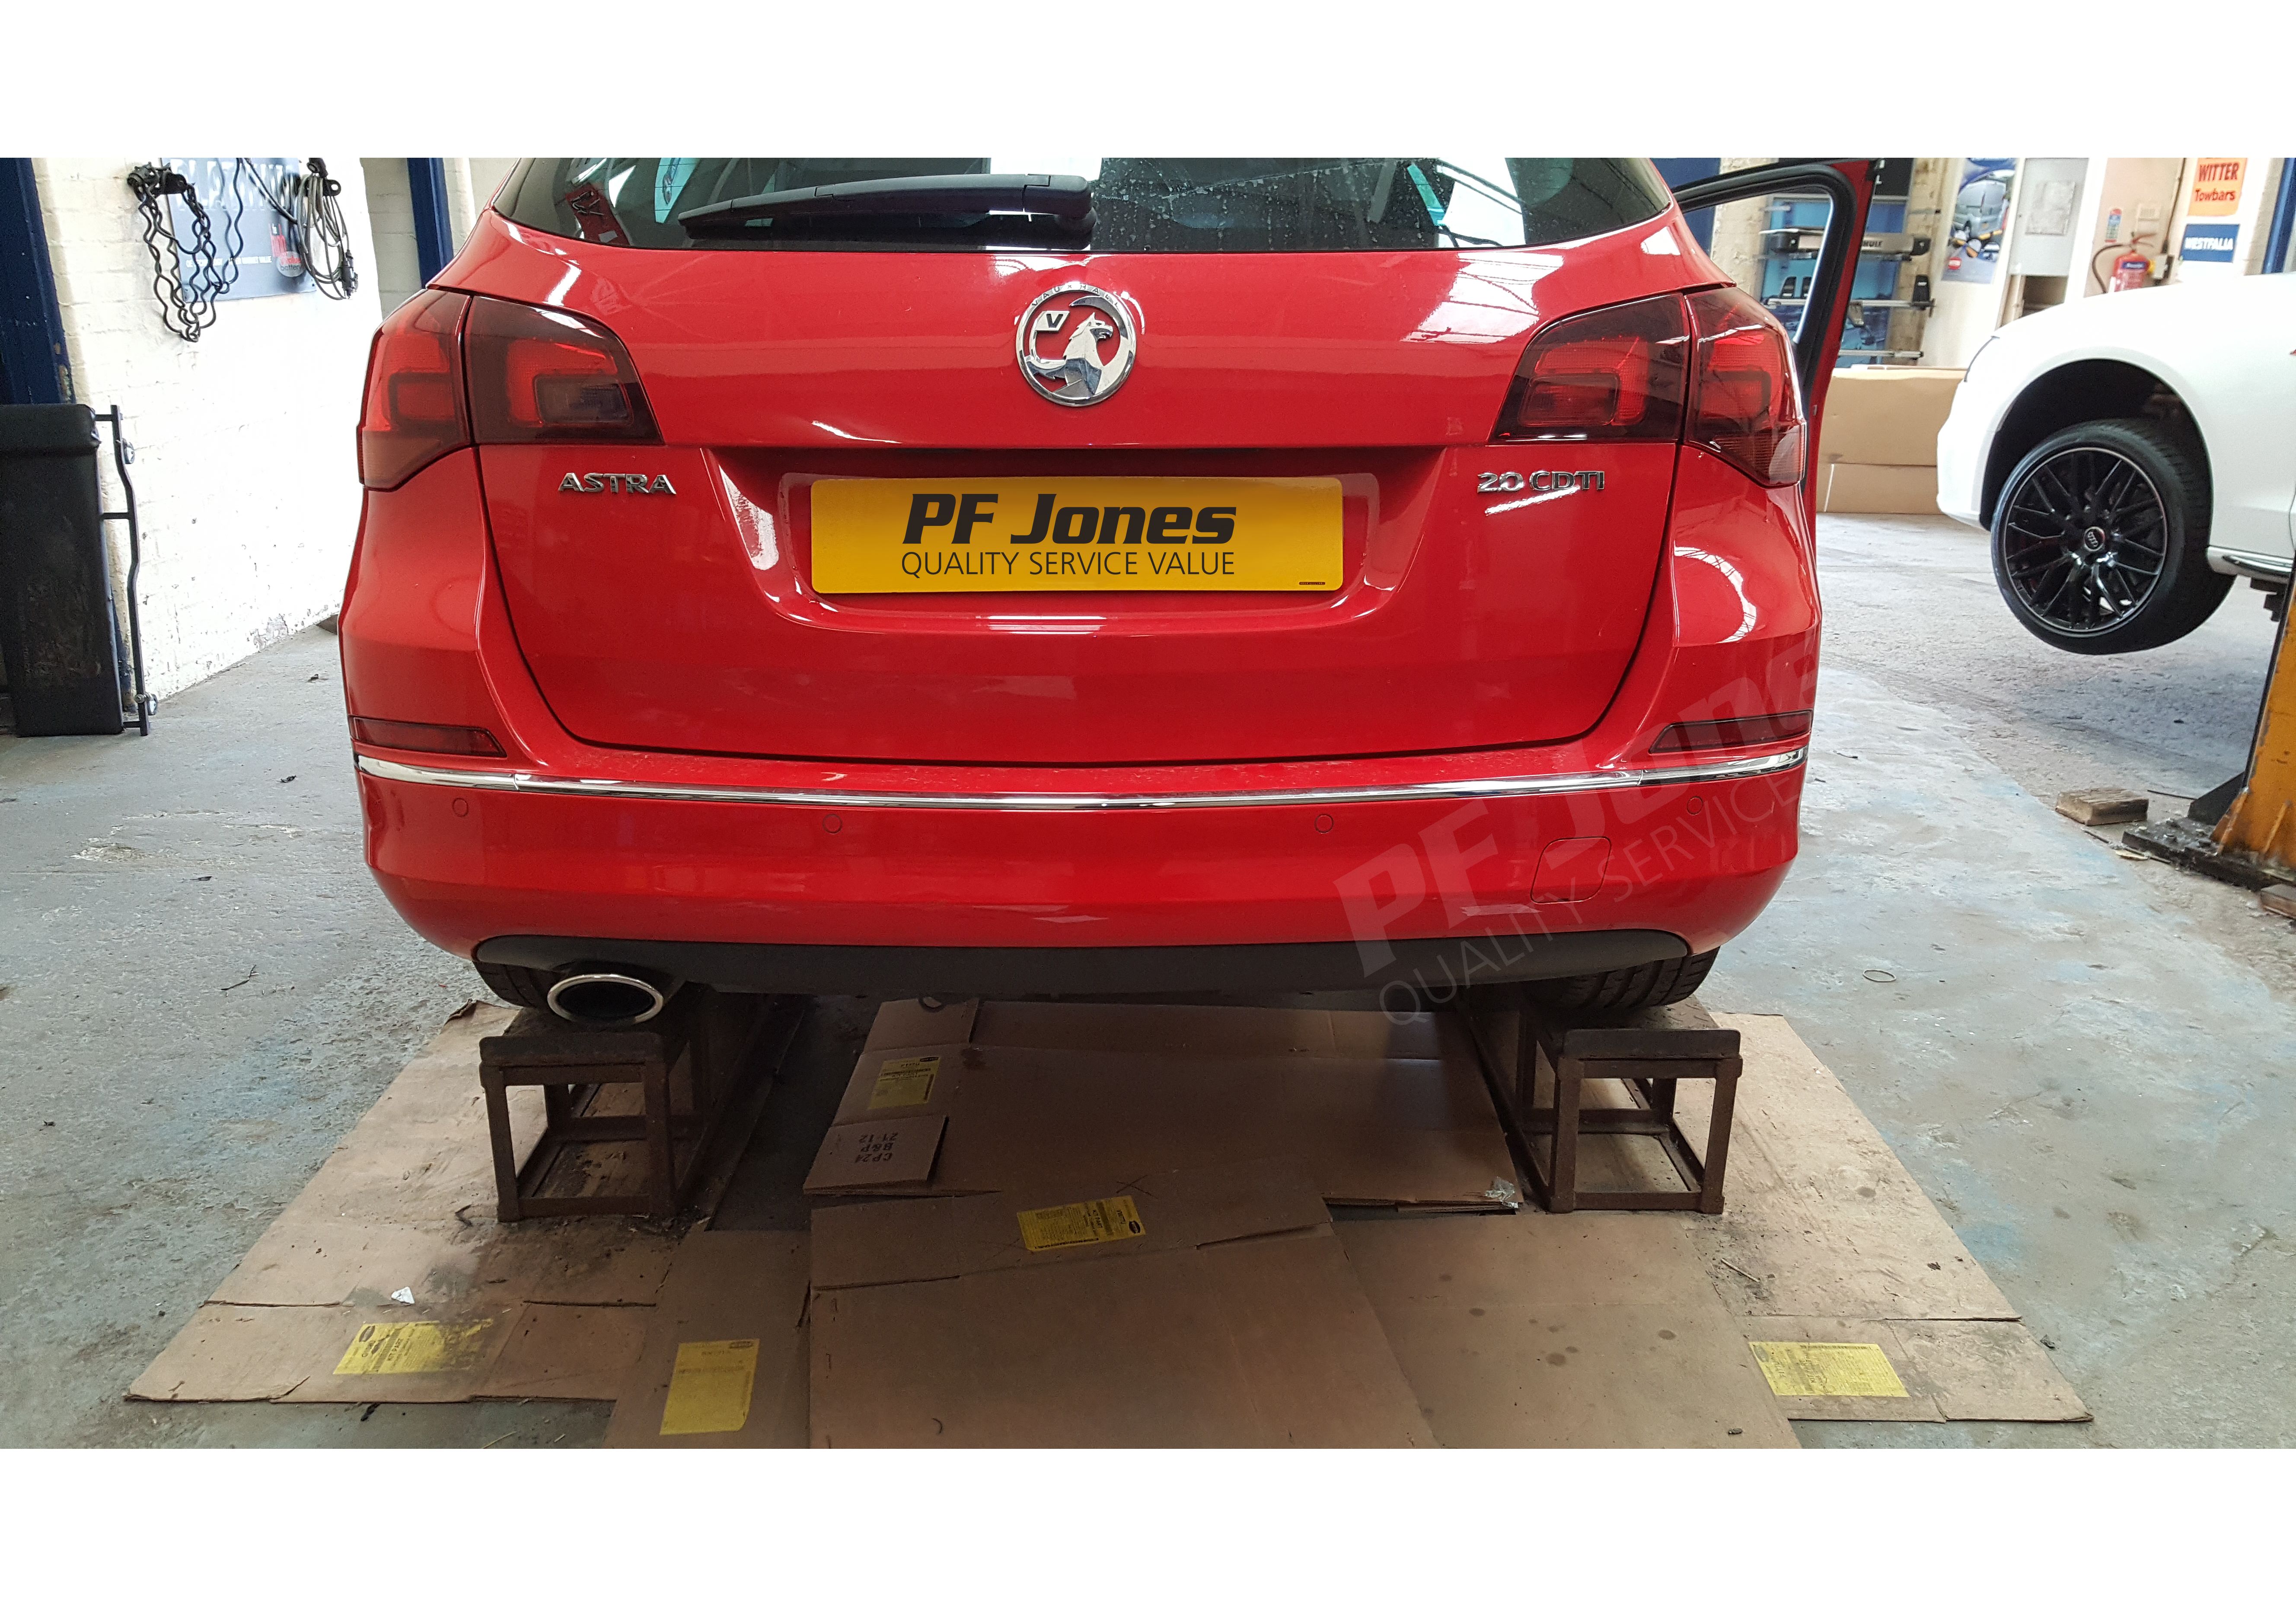 5 Door 1/2009-11/2015 Upgradable Fixed Flange Towbar for Vauxhall Astra J Hatchback Two Hole 